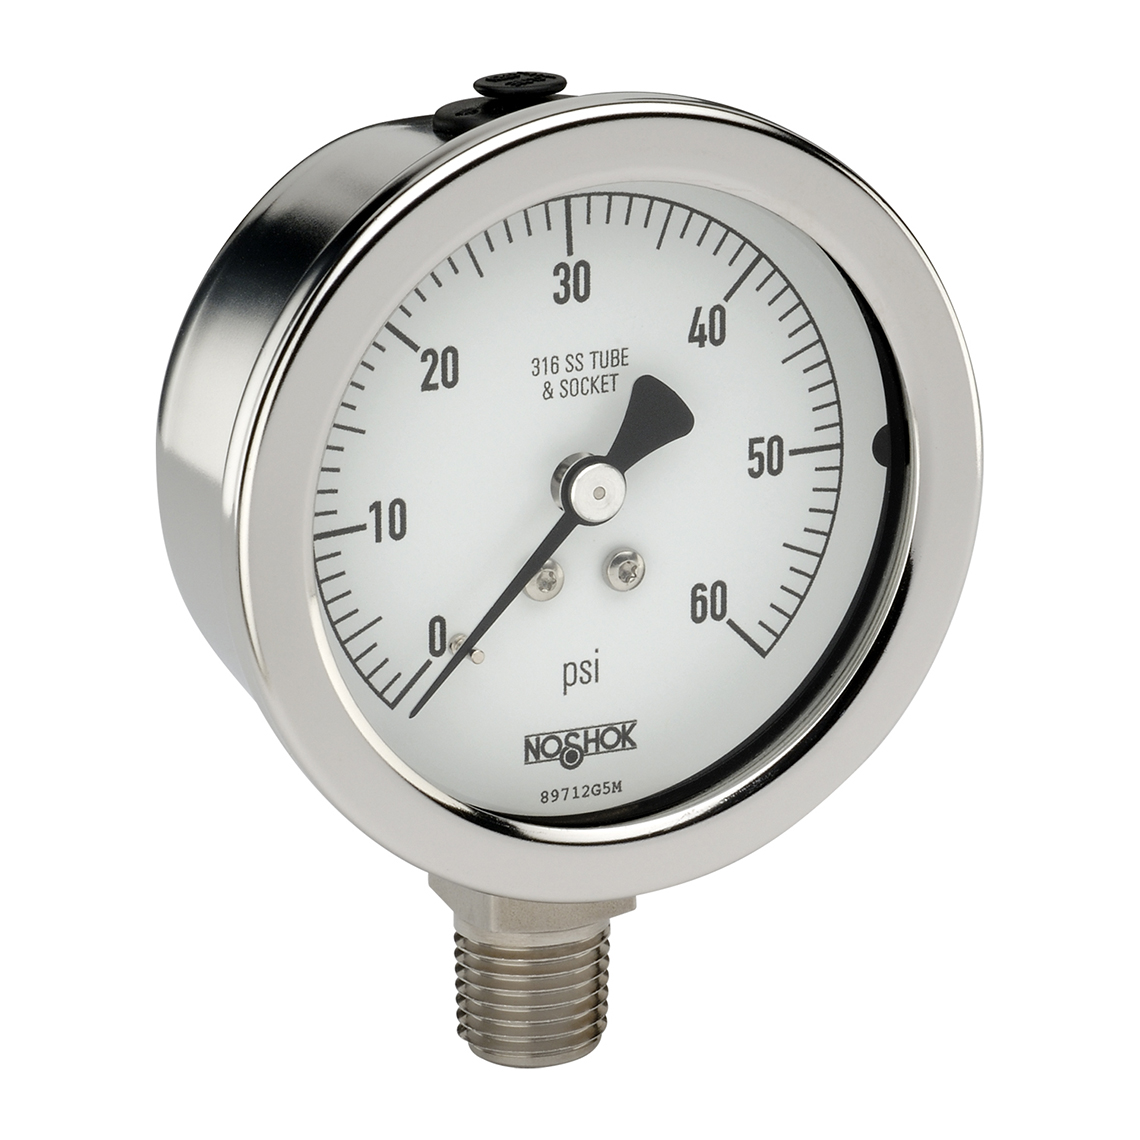 25-400-30-psi-SG 400/500 Series All Stainless Steel Dry and Liquid Filled Pressure Gauges